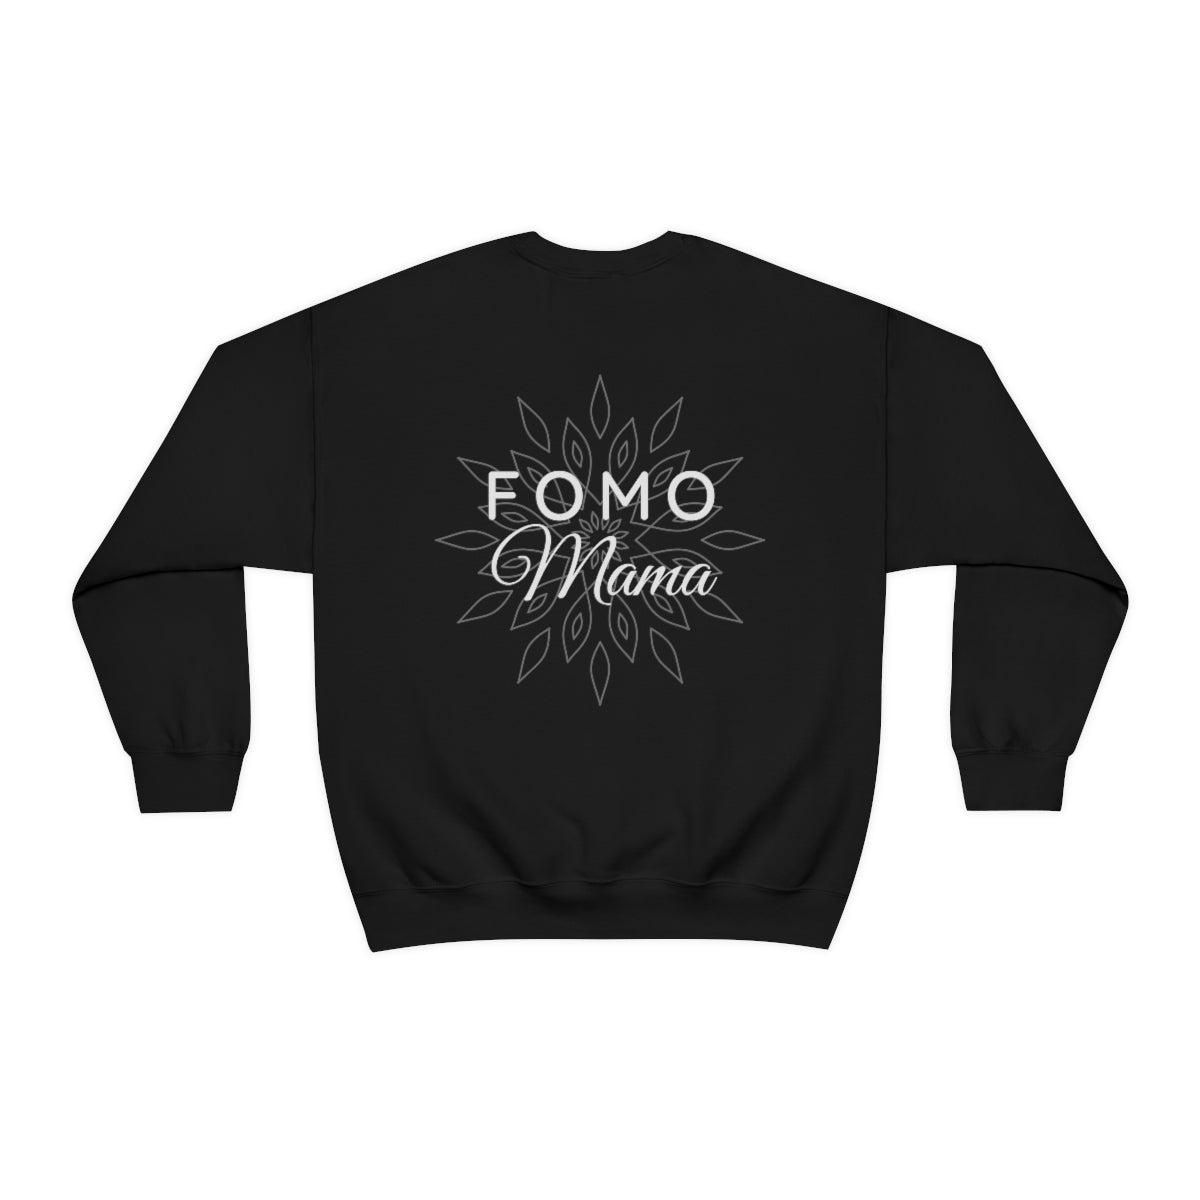 Deck the Halls & Not Your Family Crewneck